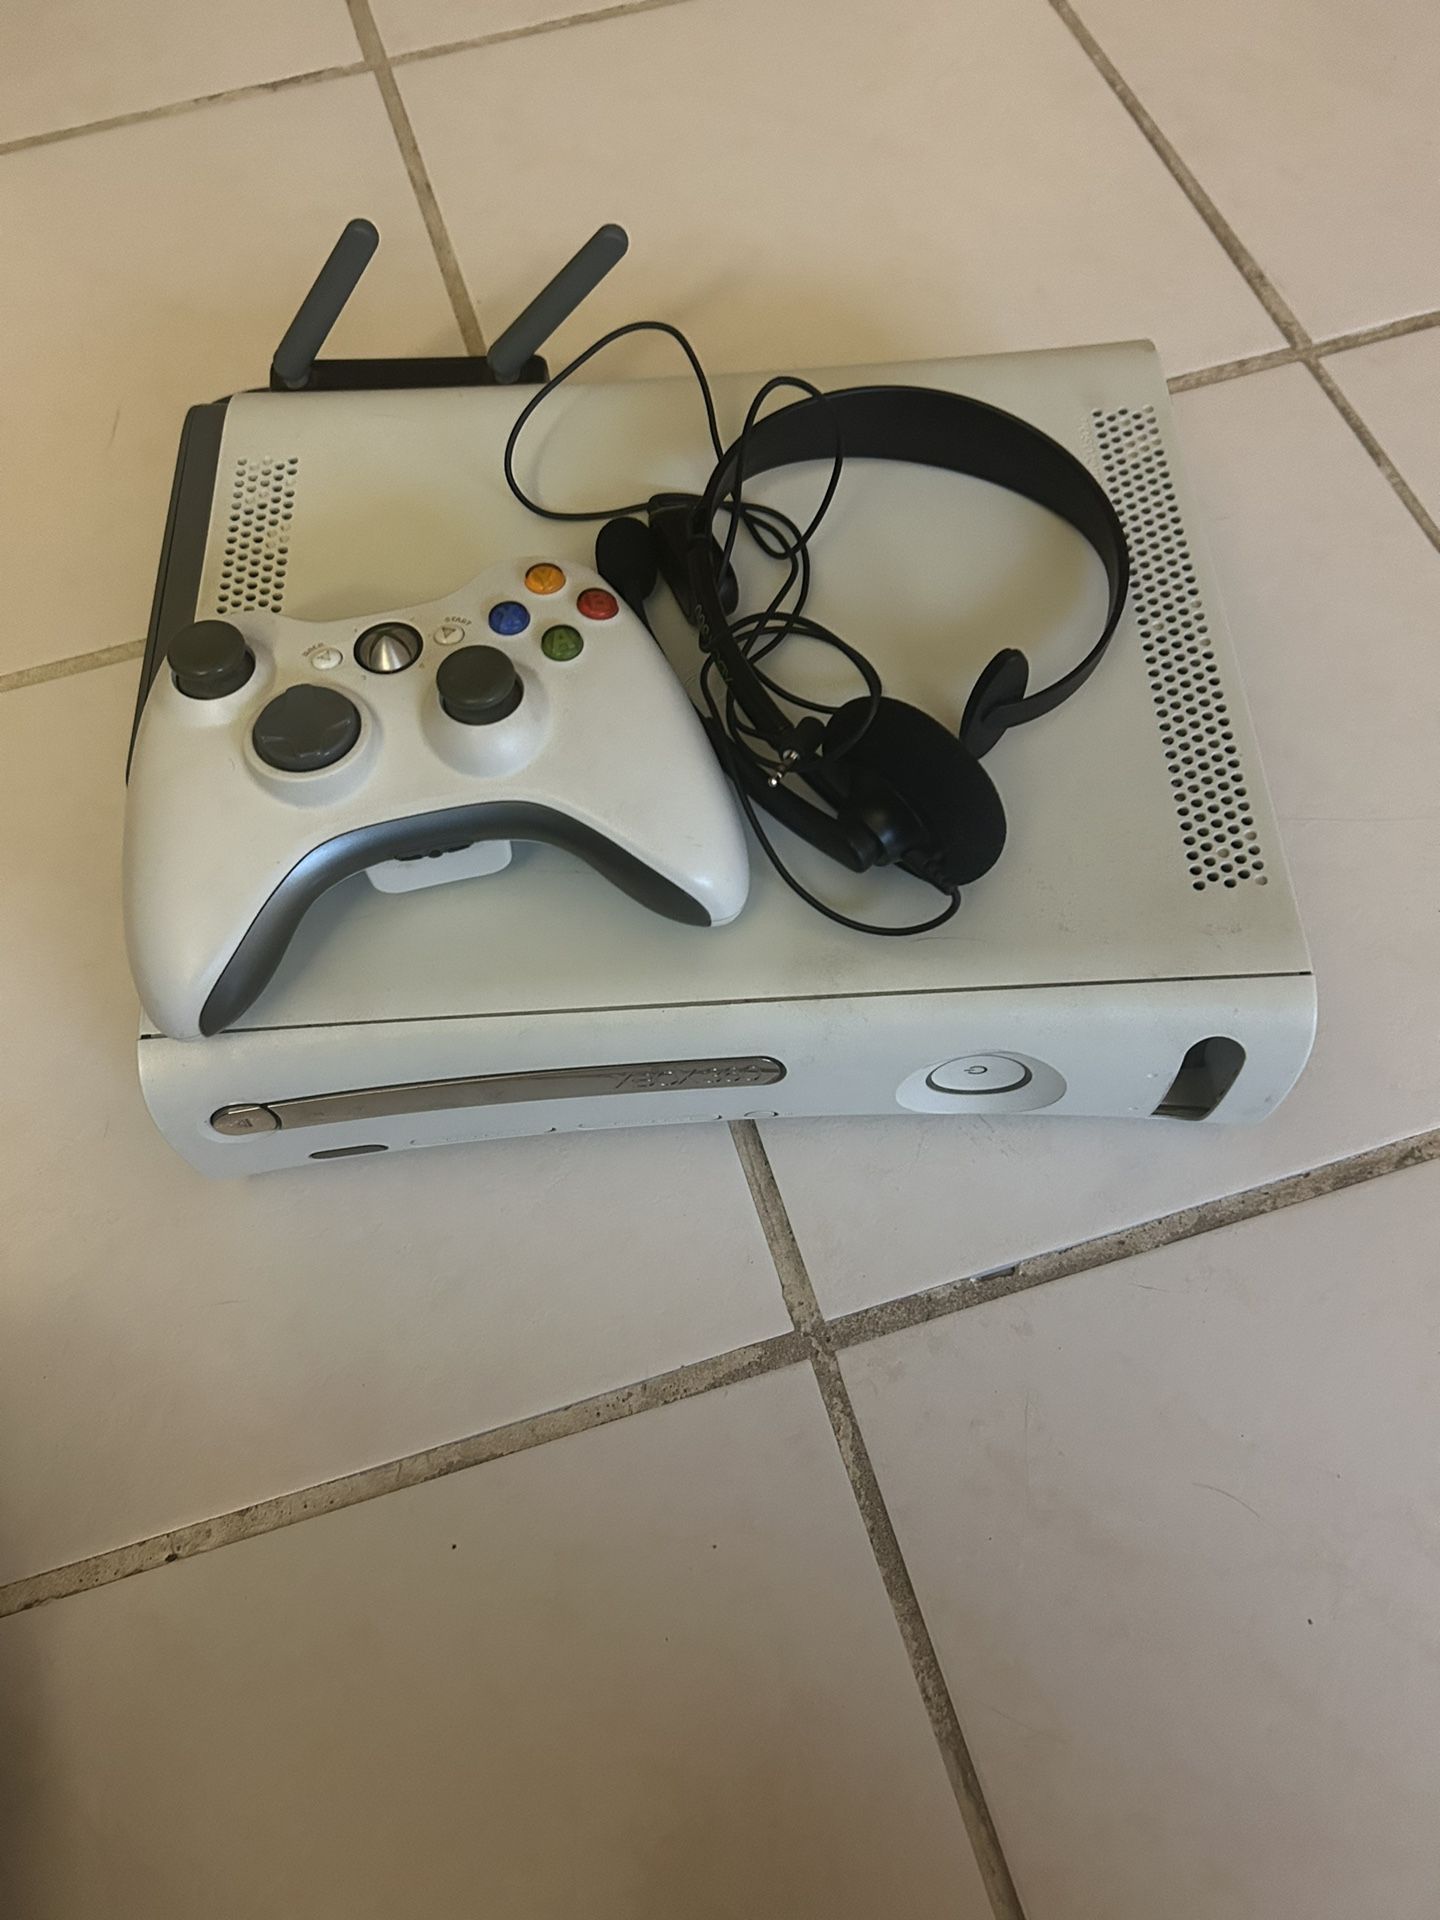 Xbox 360 with headset and wifi adapter